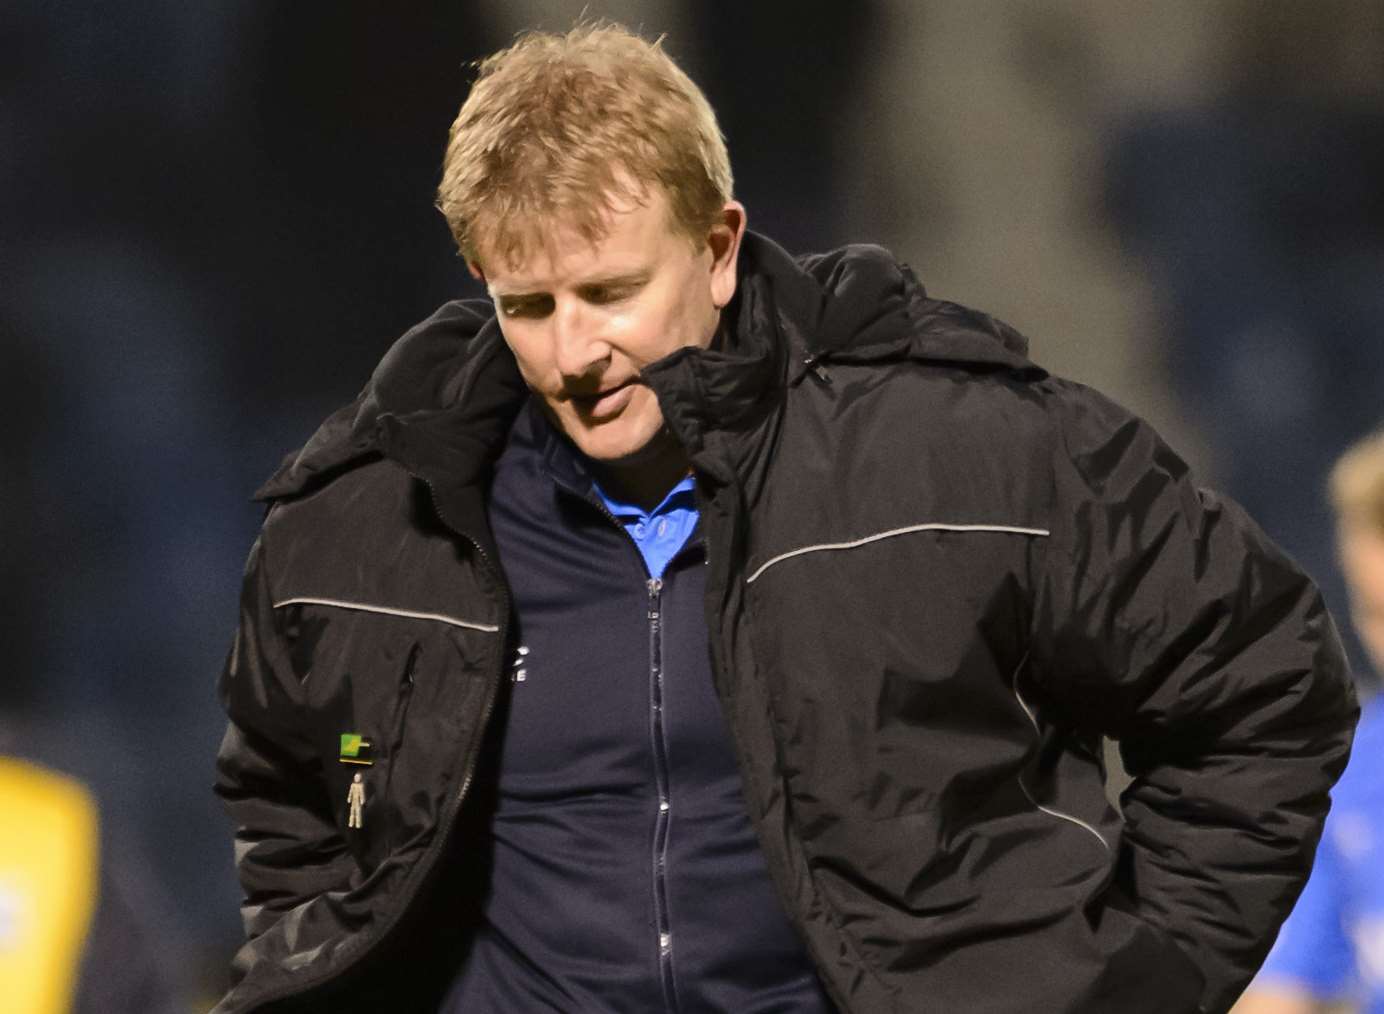 Gillingham head coach Ady Pennock Picture: Andy Payton